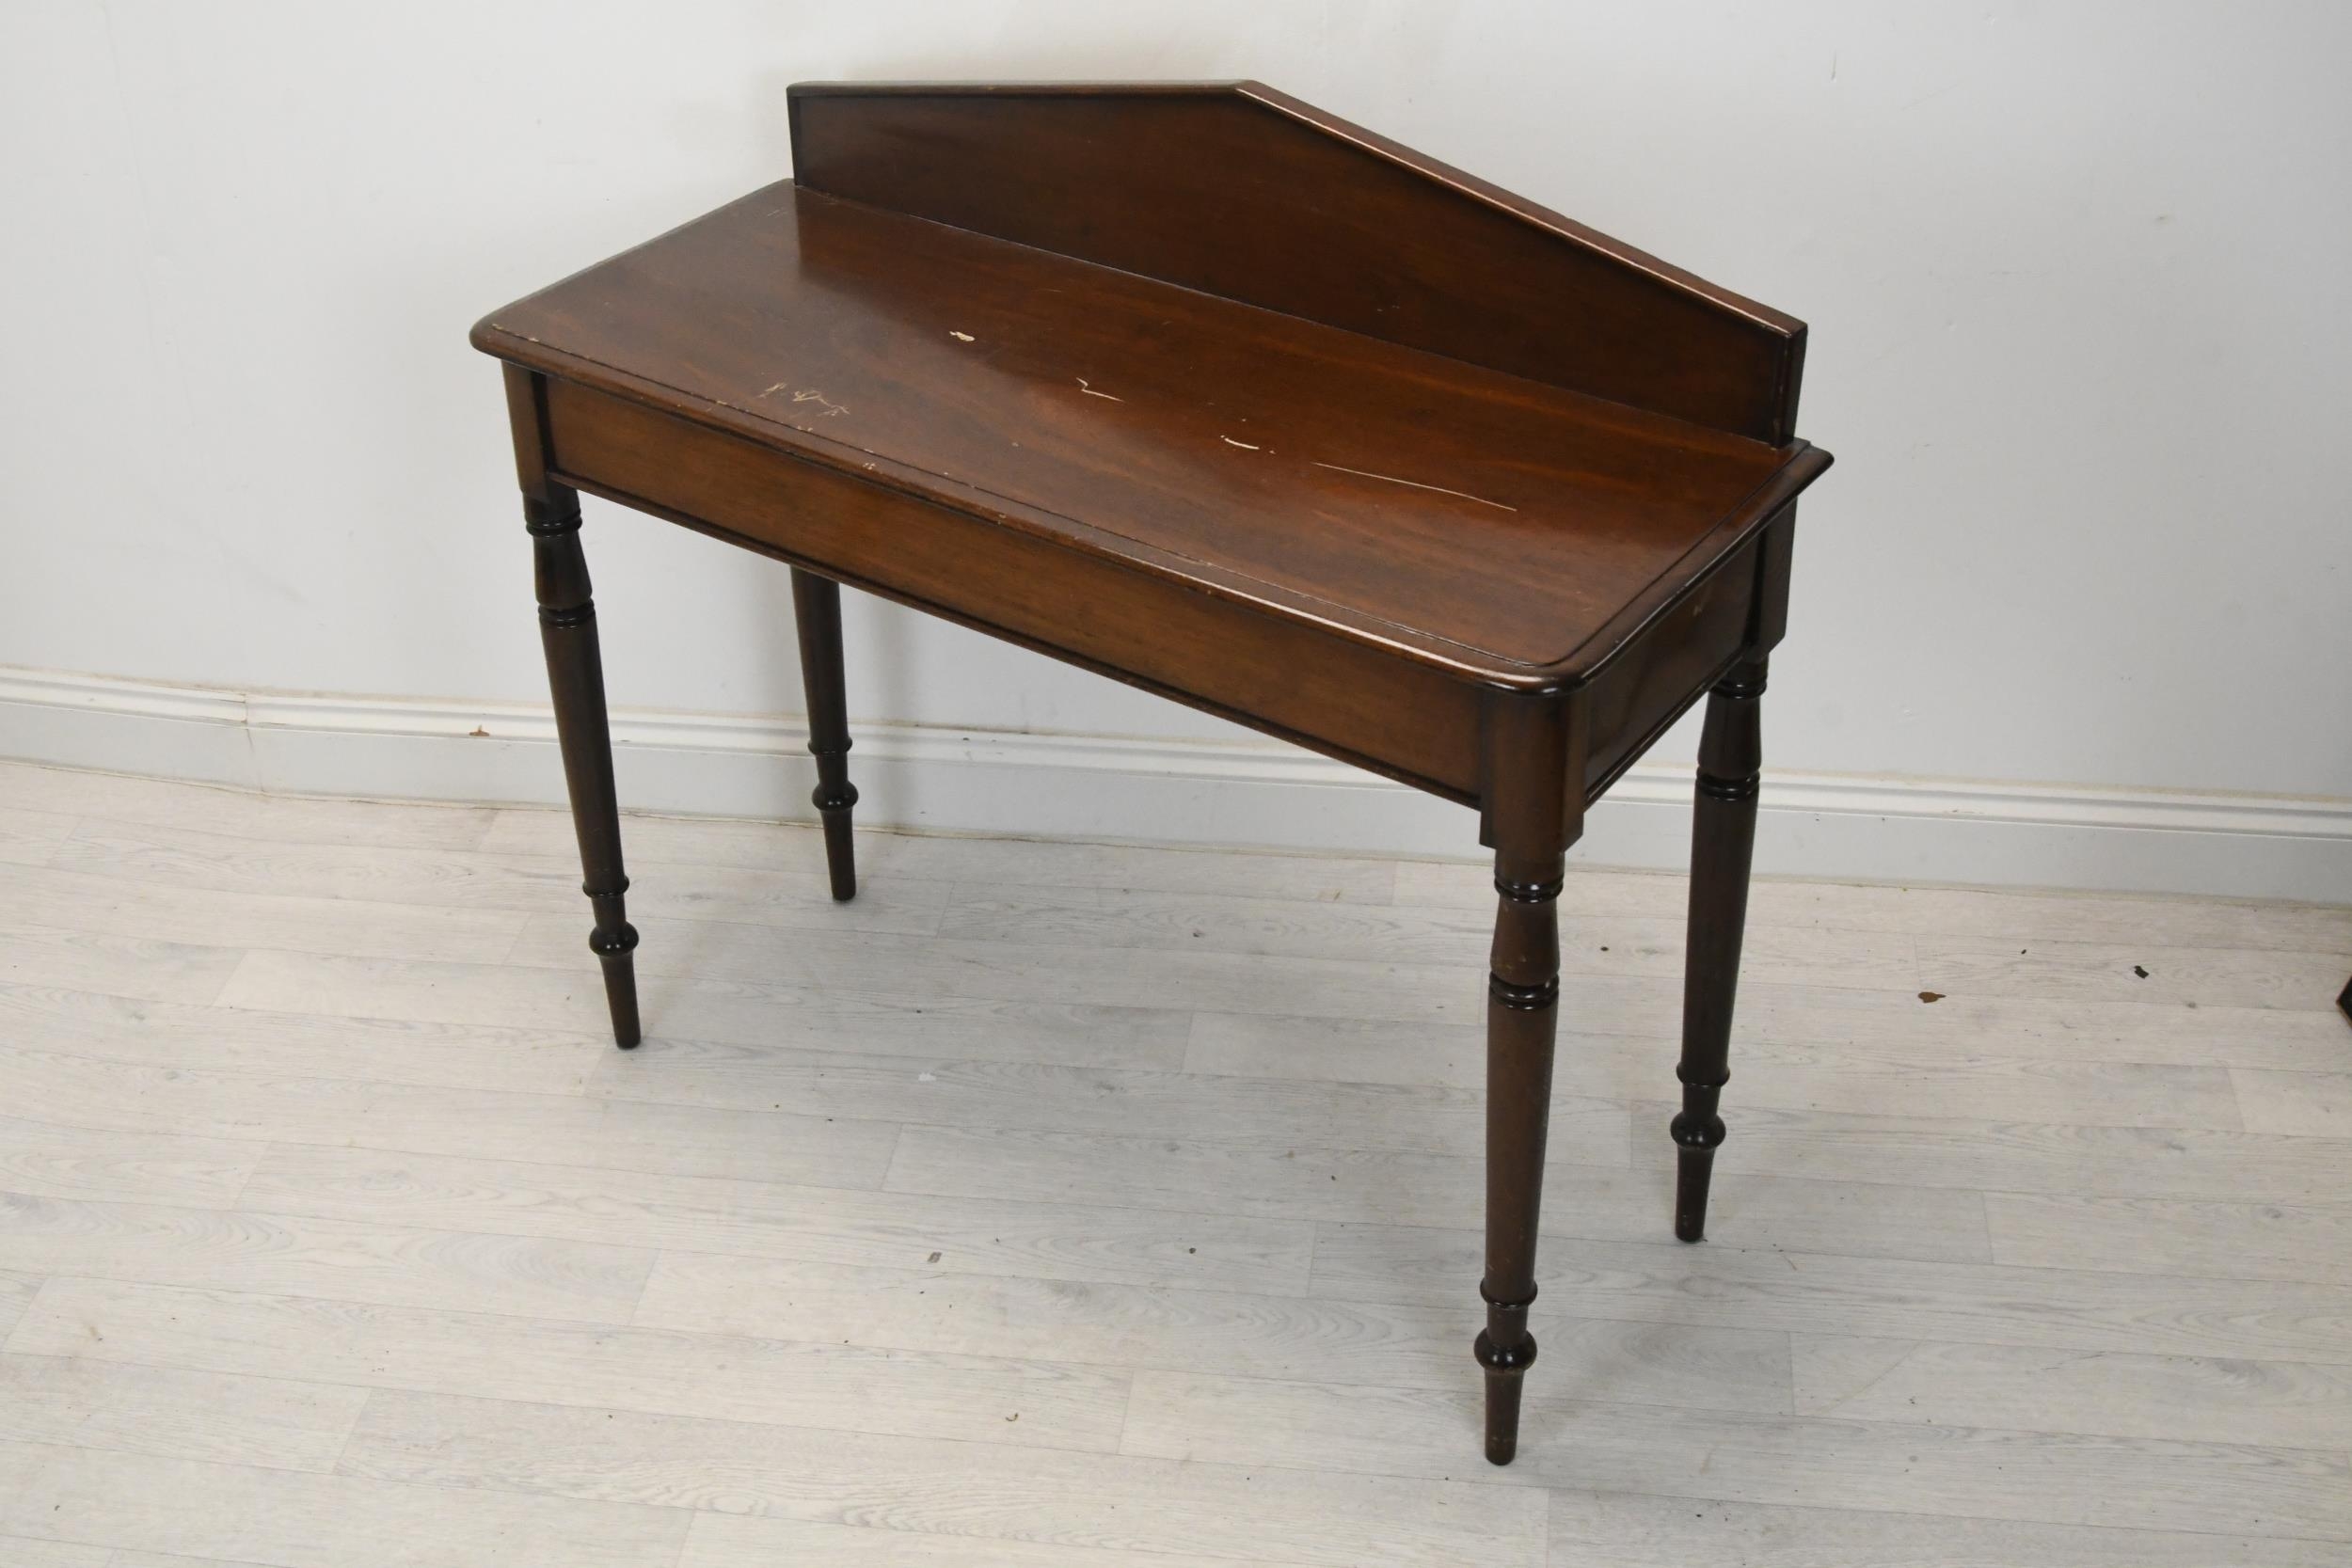 Console table, mid 19th century mahogany on turned supports. H.98 W.102 D.42 (Some damage as seen). - Image 2 of 6